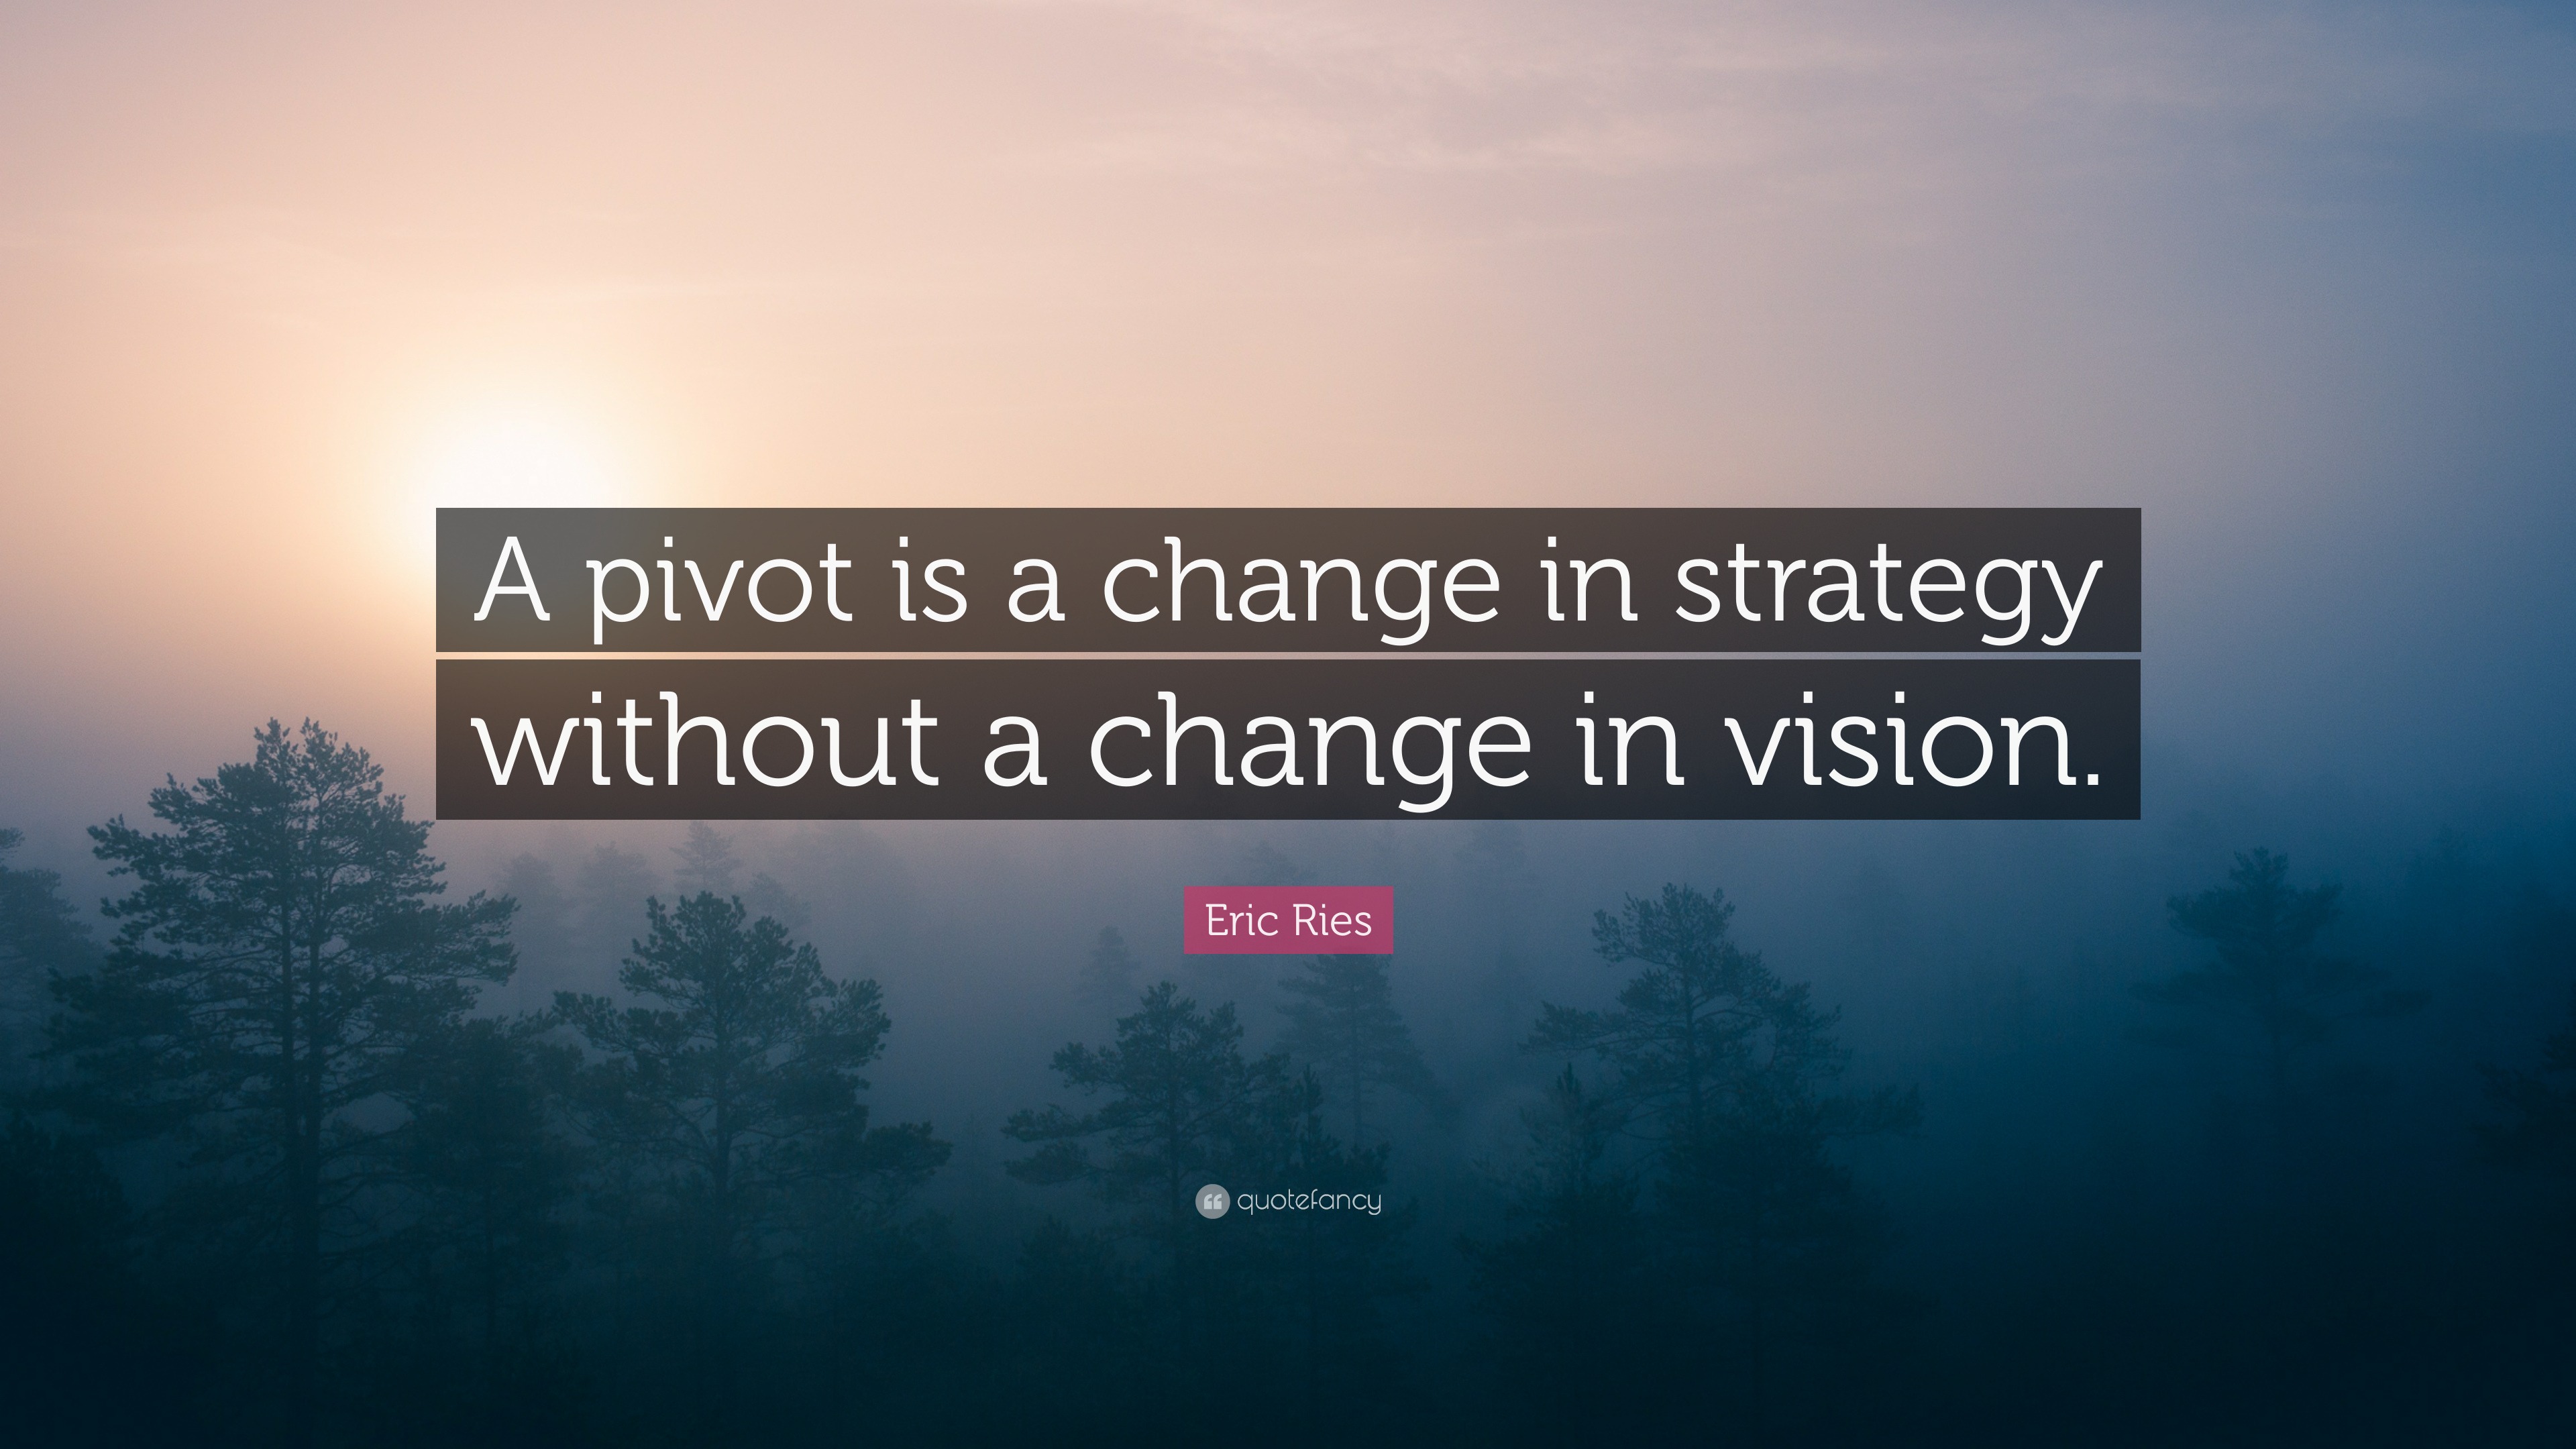 Eric Ries Quote: “A pivot is a change in strategy without a change in ...